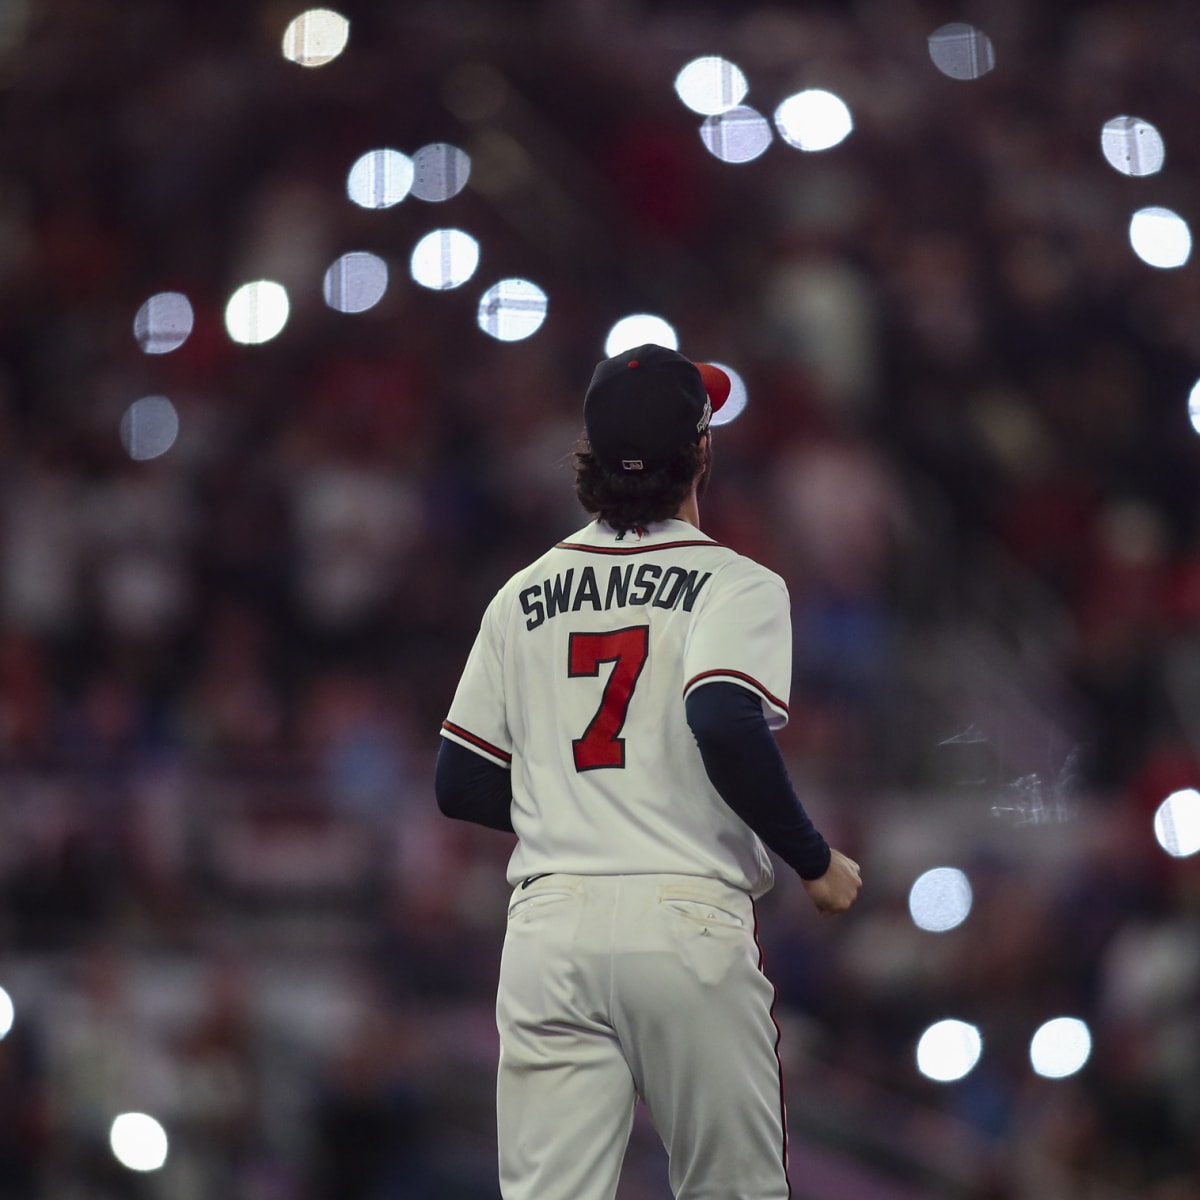 Dansby Swanson Posts Goodbye Message on Instagram to Atlanta Braves Fans -  Fastball